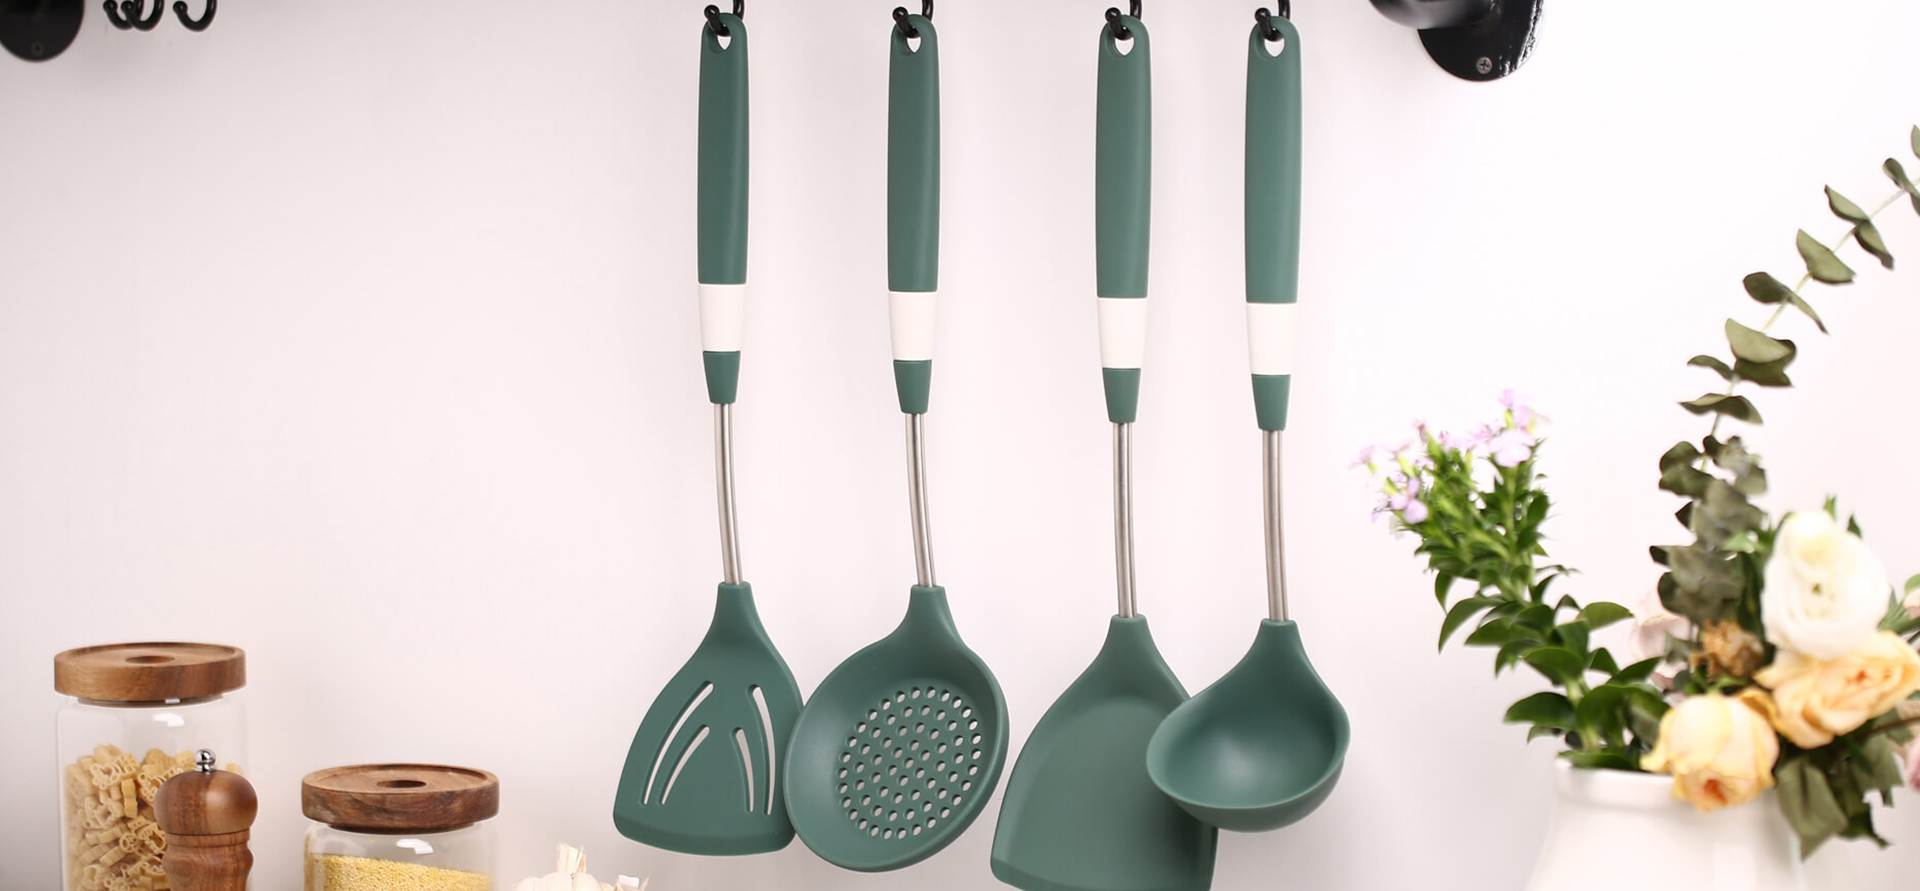 Cooking Utensil Sets